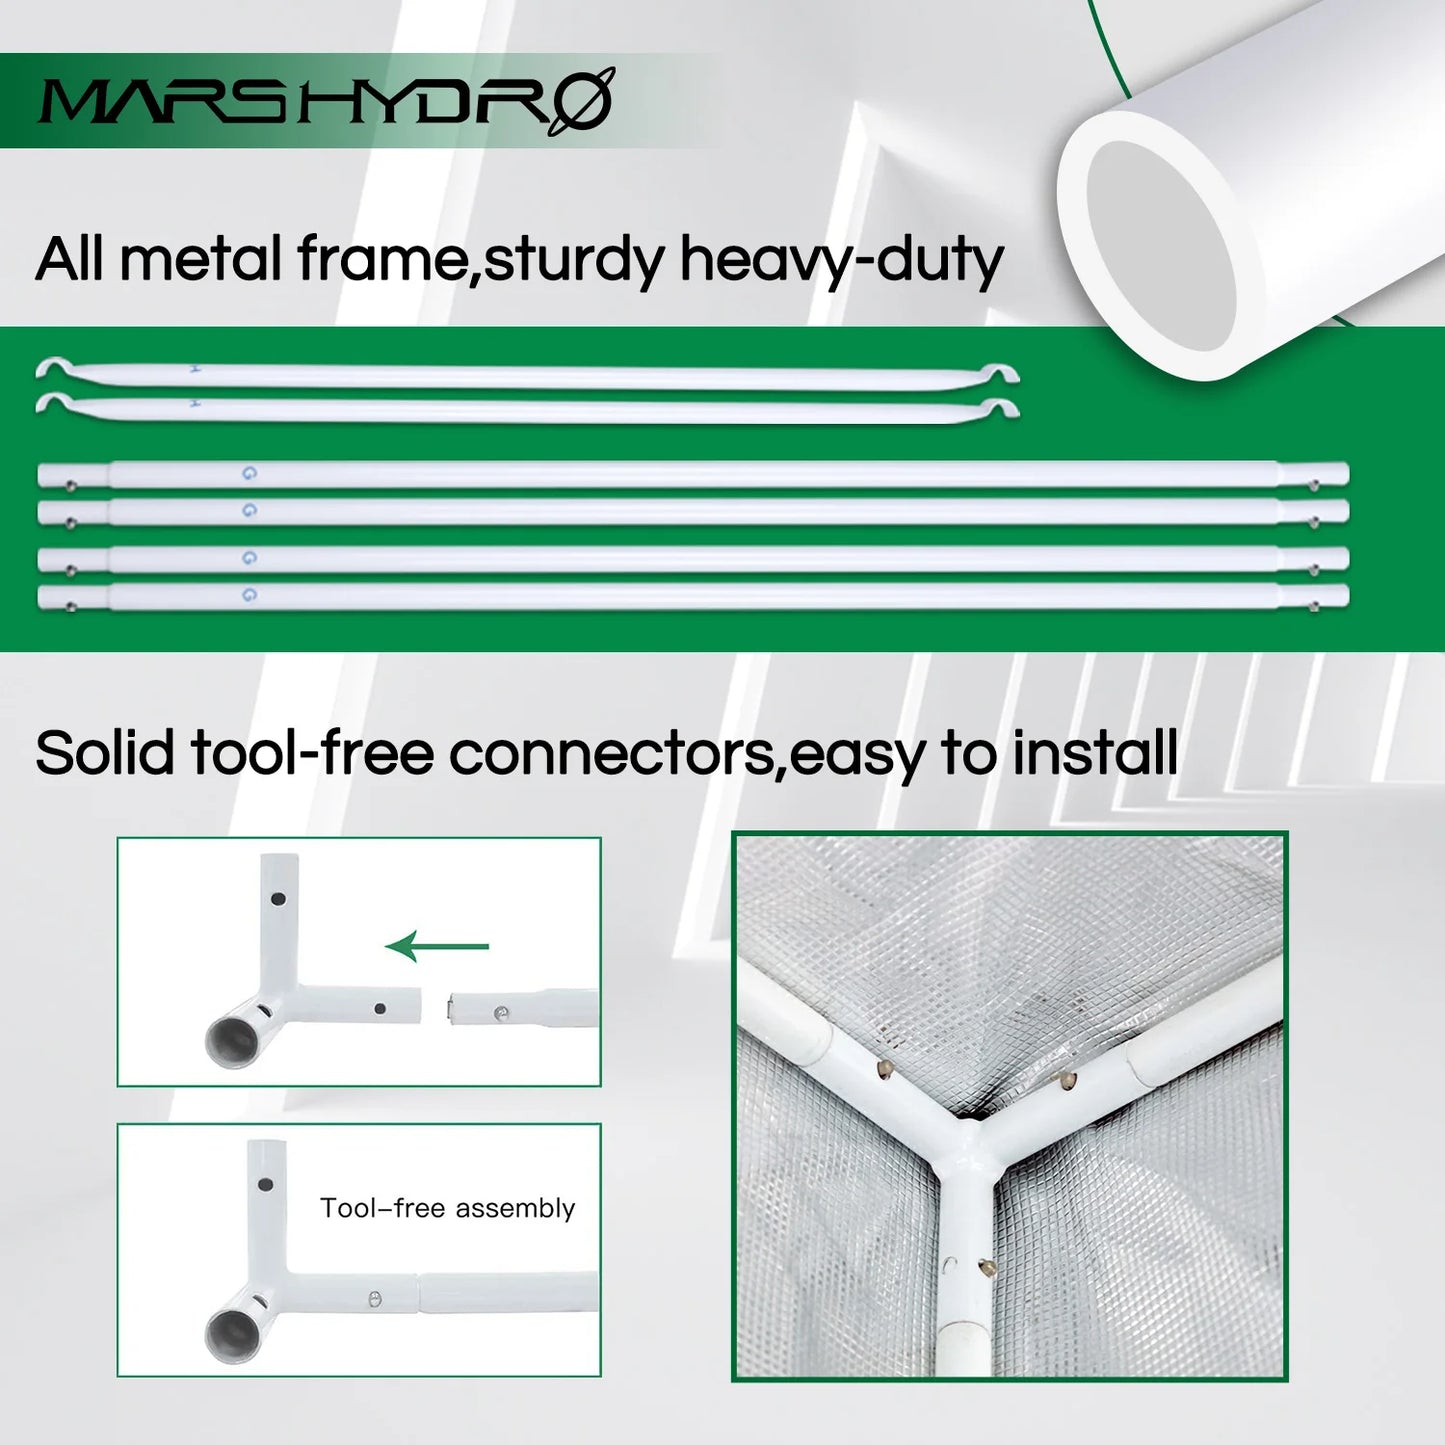 1680D Marshydro Indoor Hydroponics grow tent 240*120*200cm ,Grow kit,Completely LED Indoor Growing System